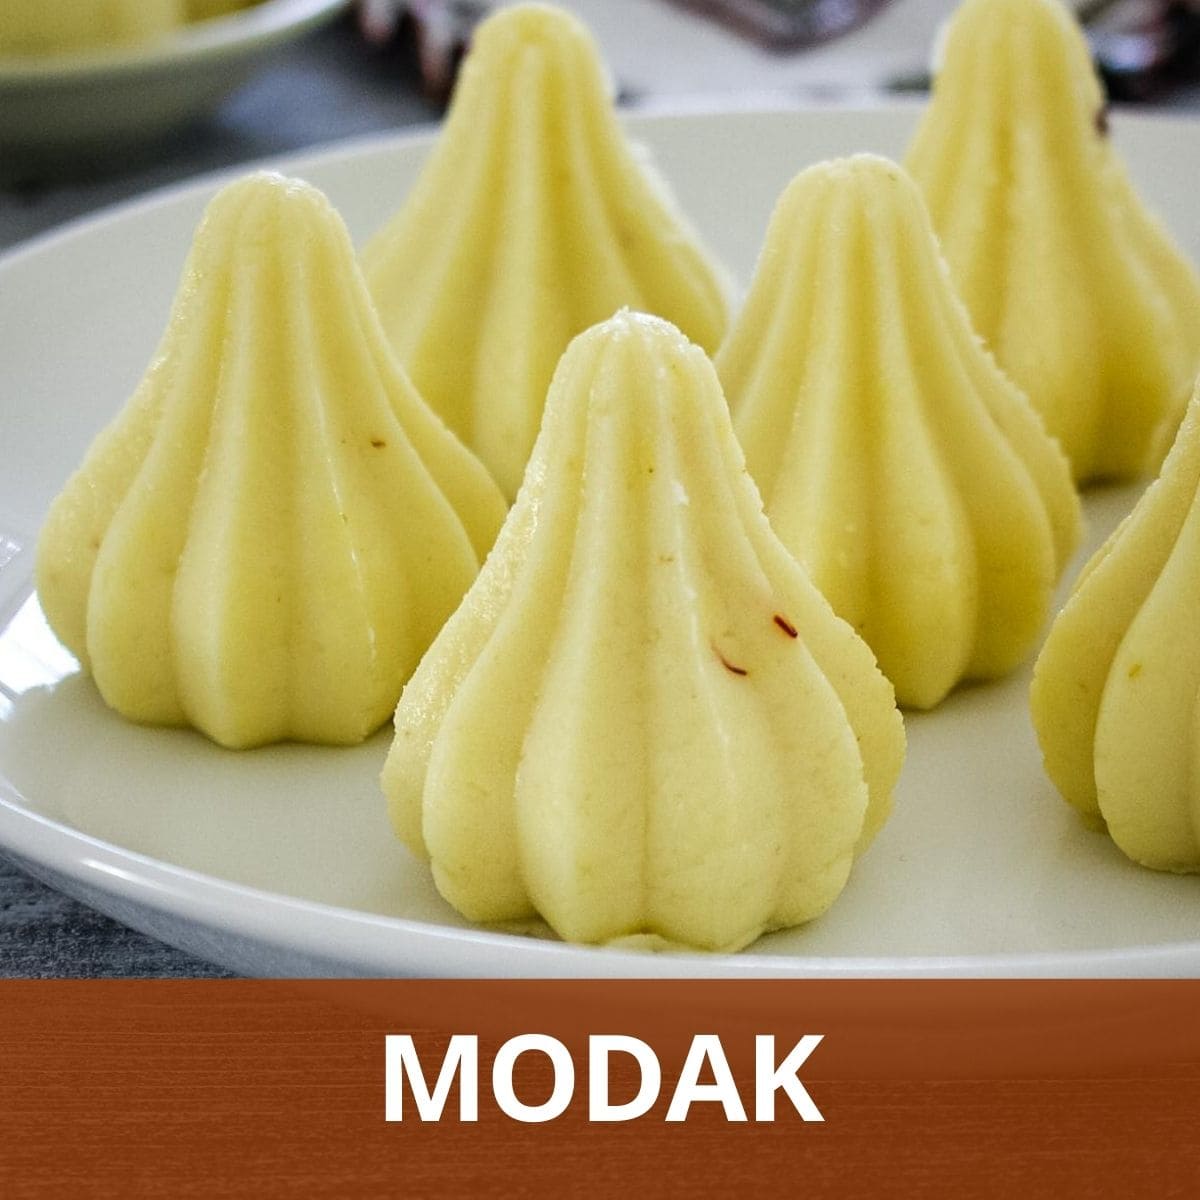 Modak arranged on a plate with text "modak" at the bottom with light red background